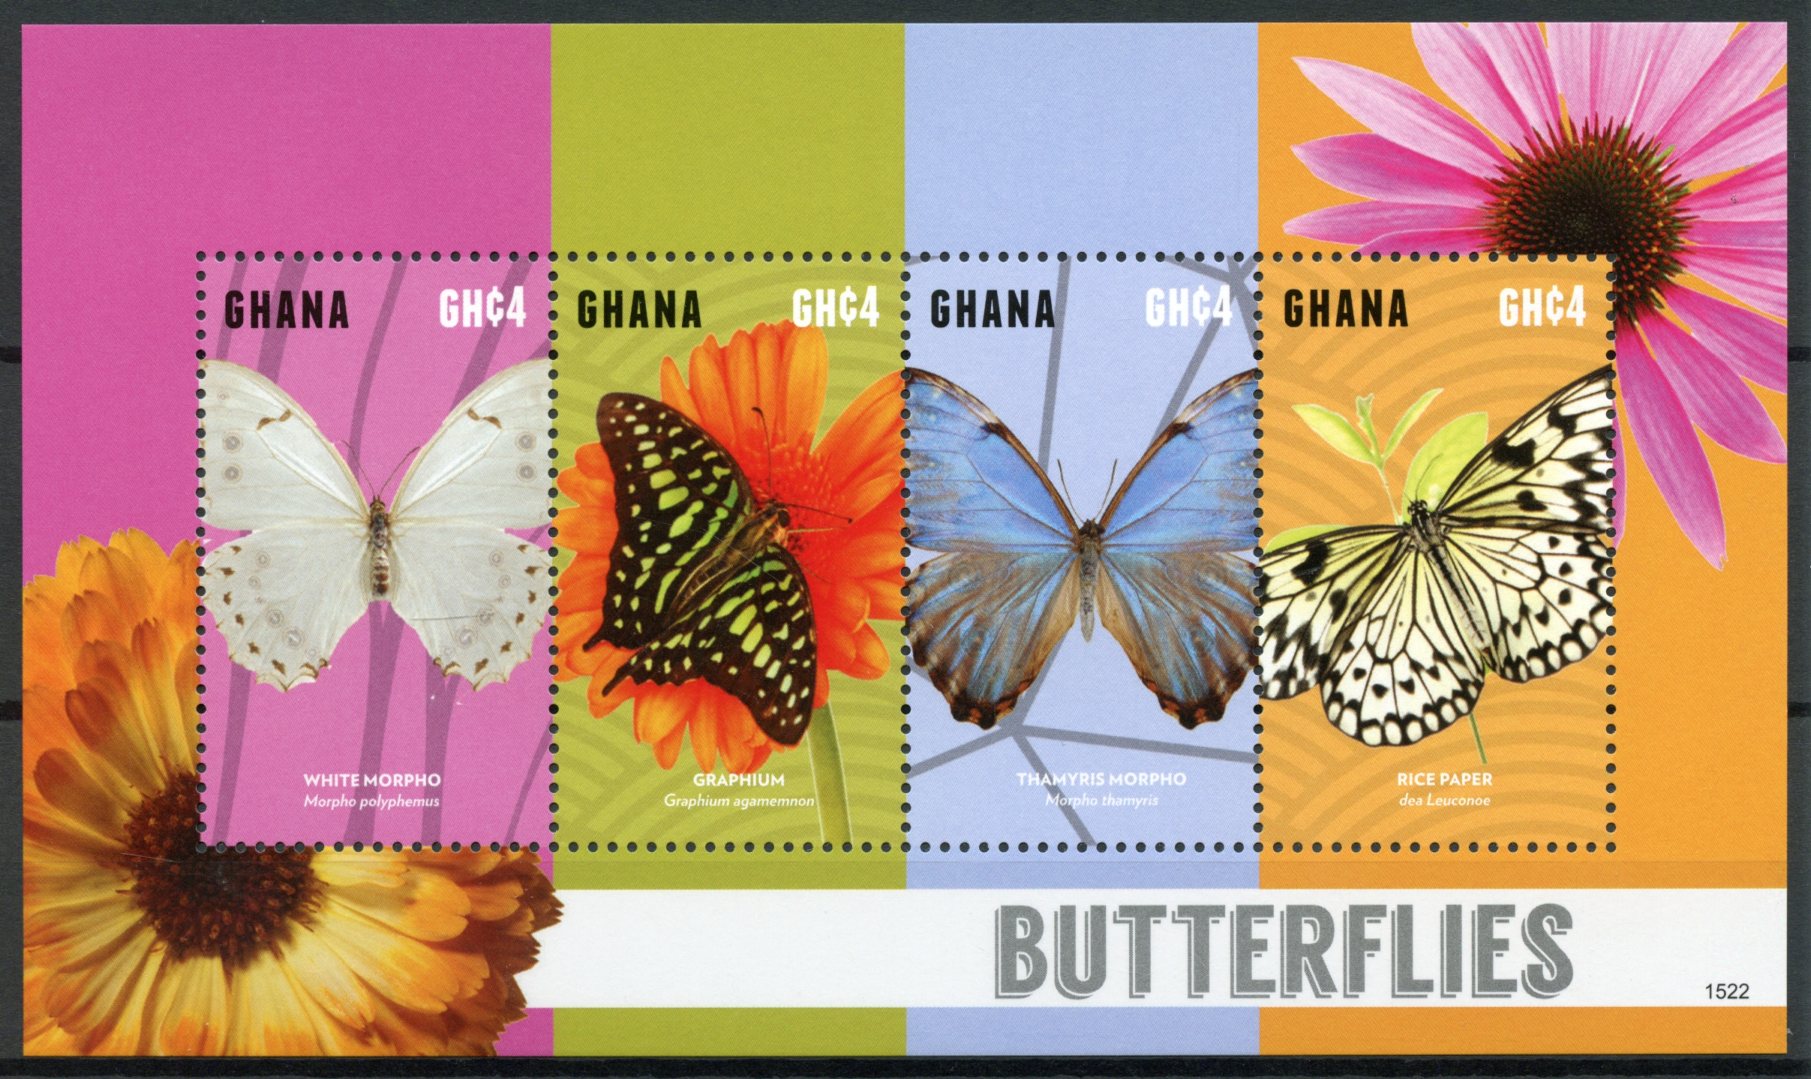 Ghana 2015 MNH Butterflies 4v M/S I Insects Morpho Graphium Rice Paper Butterfly